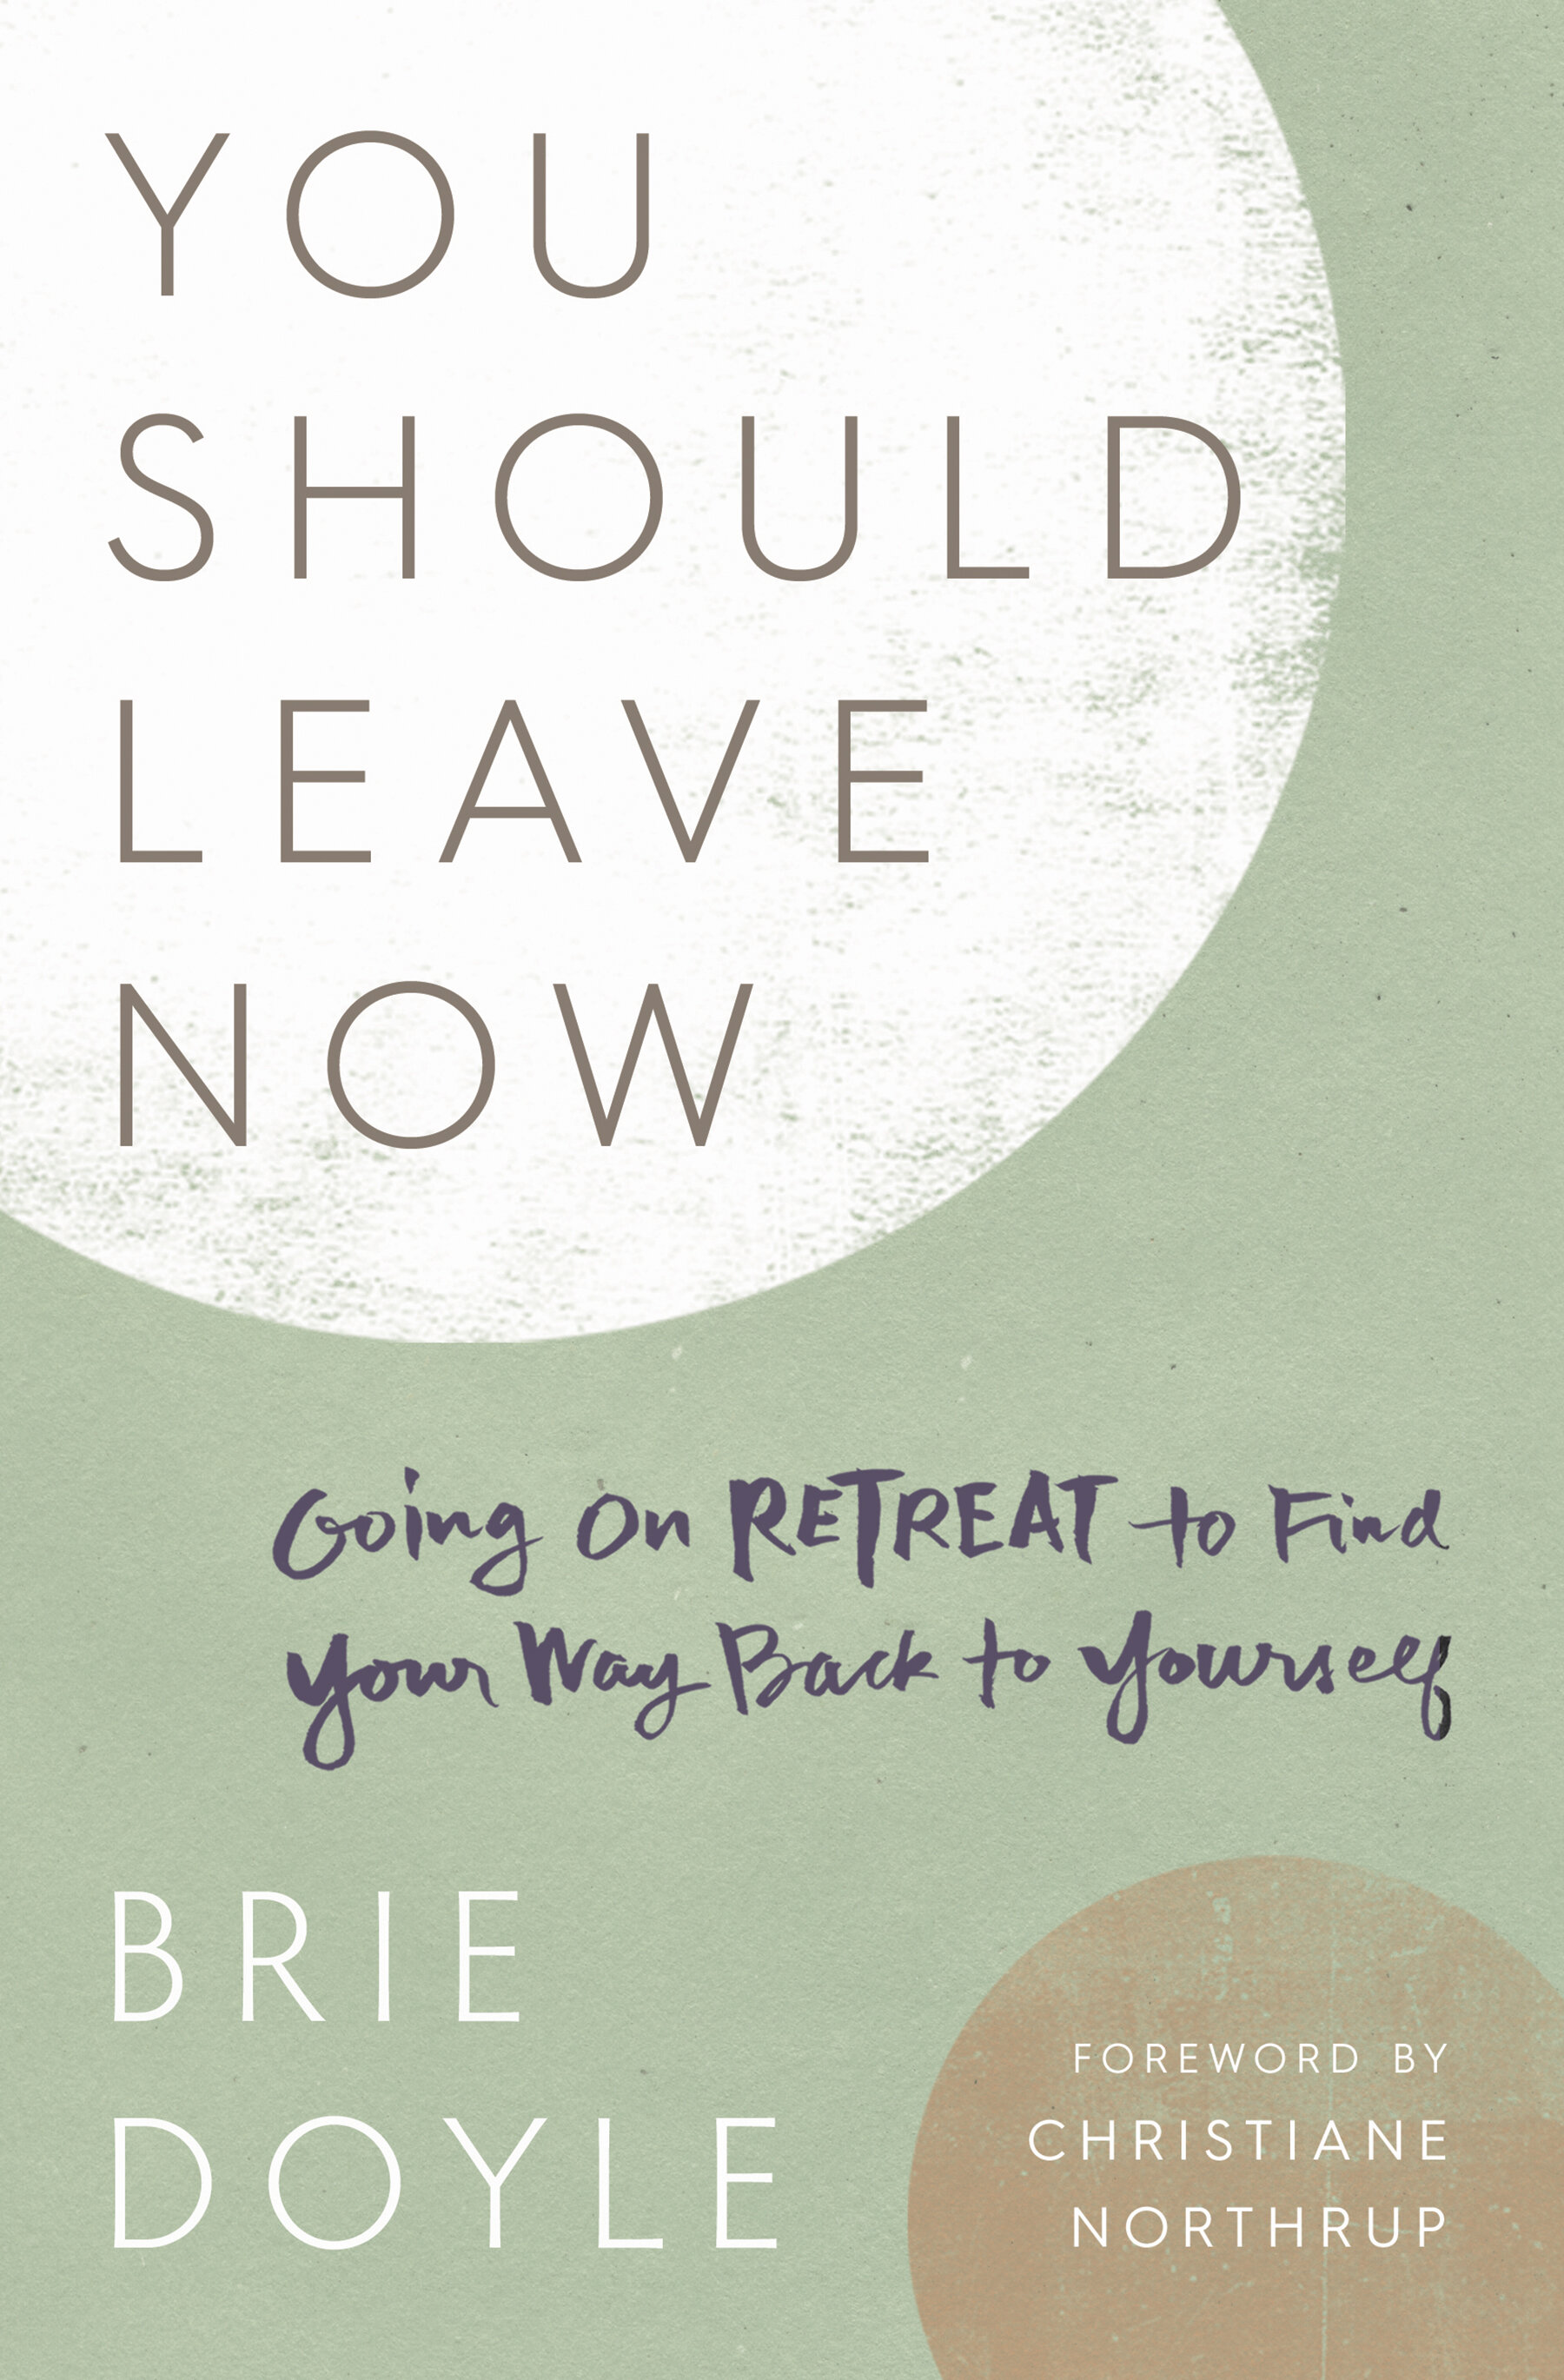 You Should Leave Now: Going on Retreat to Find Your Way Back to Yourself